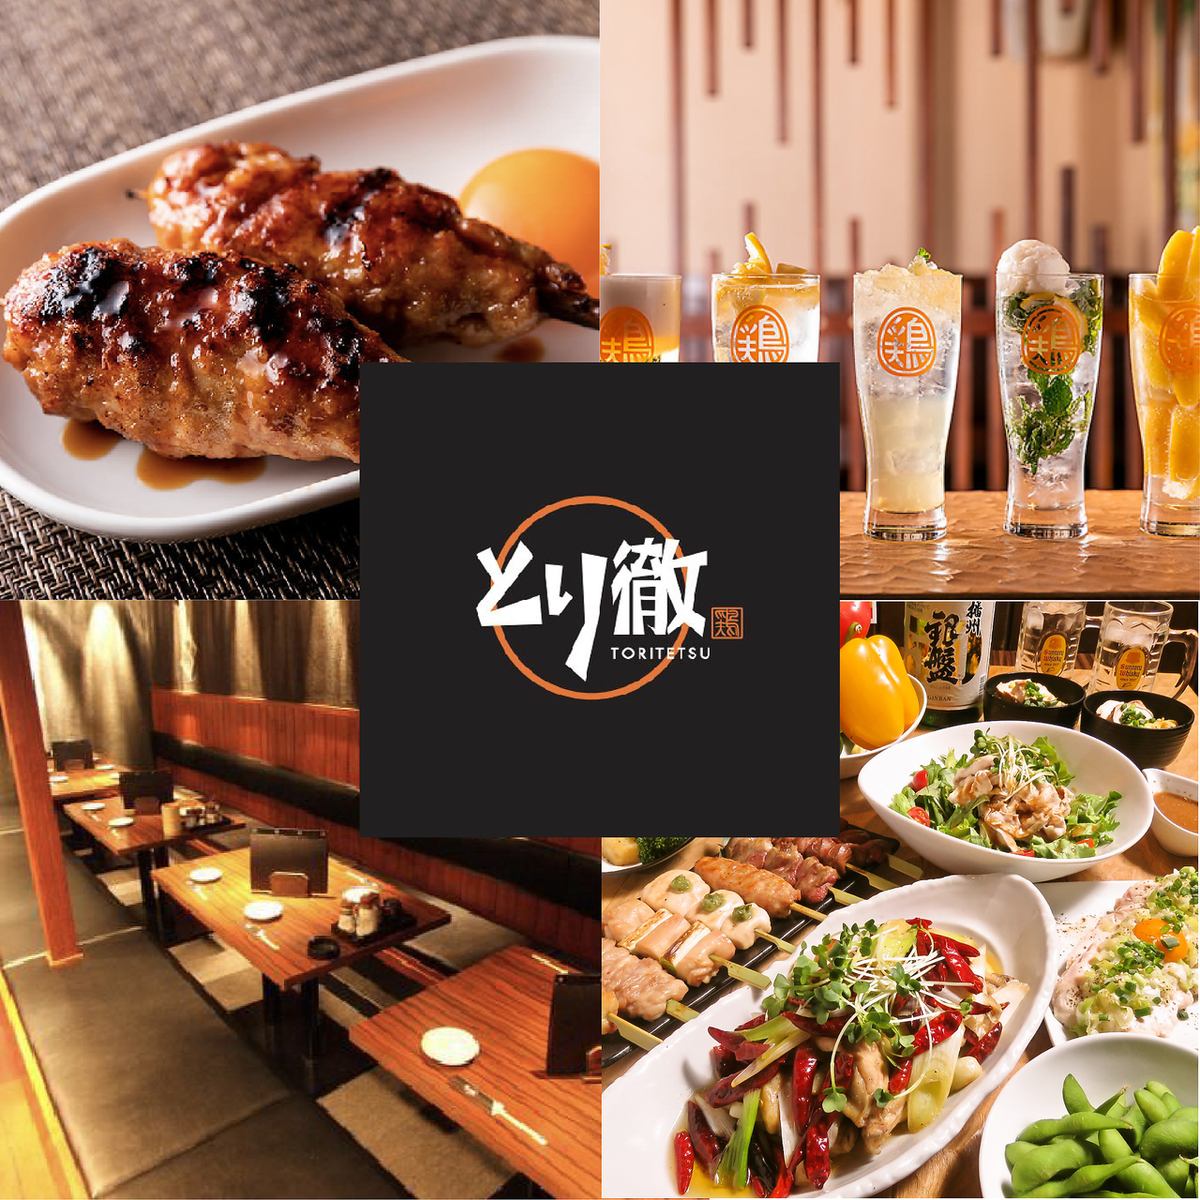 Delicious yakitori and lemon sour★ Cheerful staff and cozy interior♪